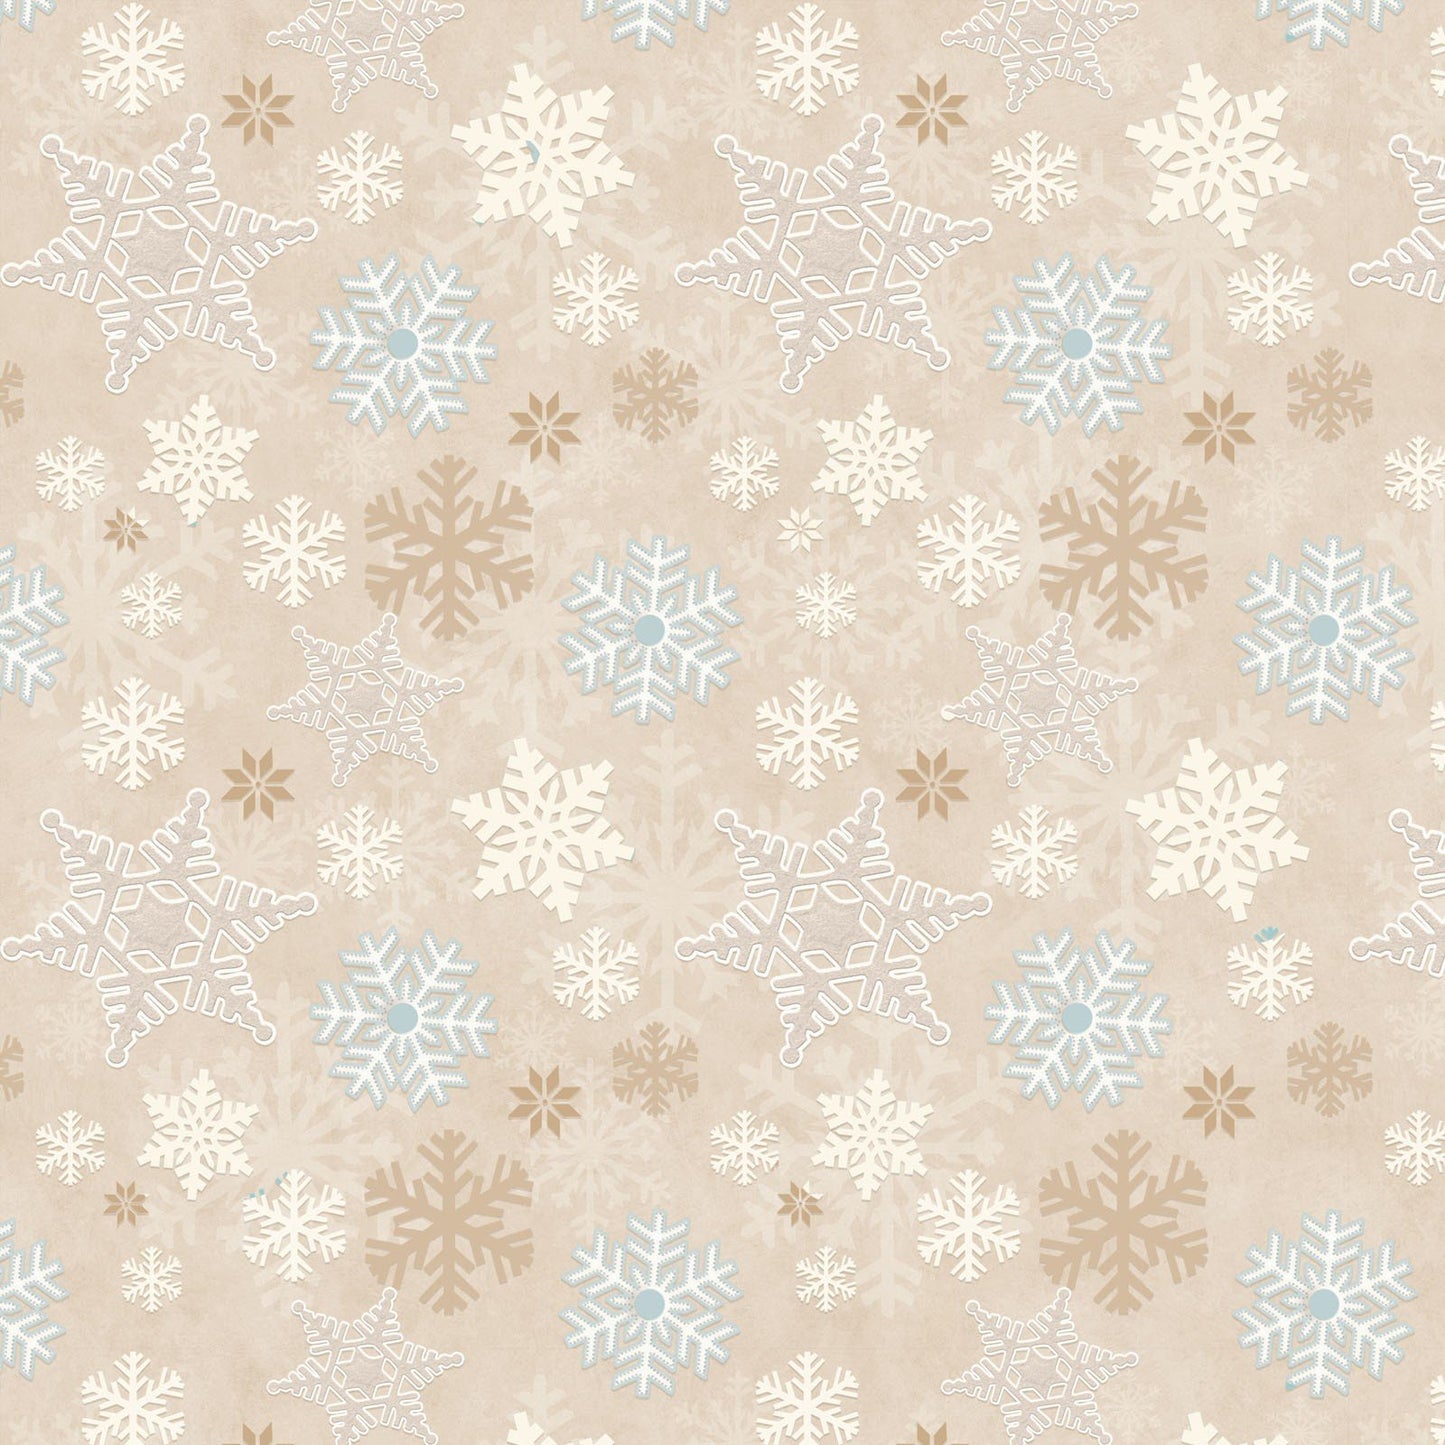 I Love Sn'Gnomies Flannel - Snowflake Allover - Licence To Quilt